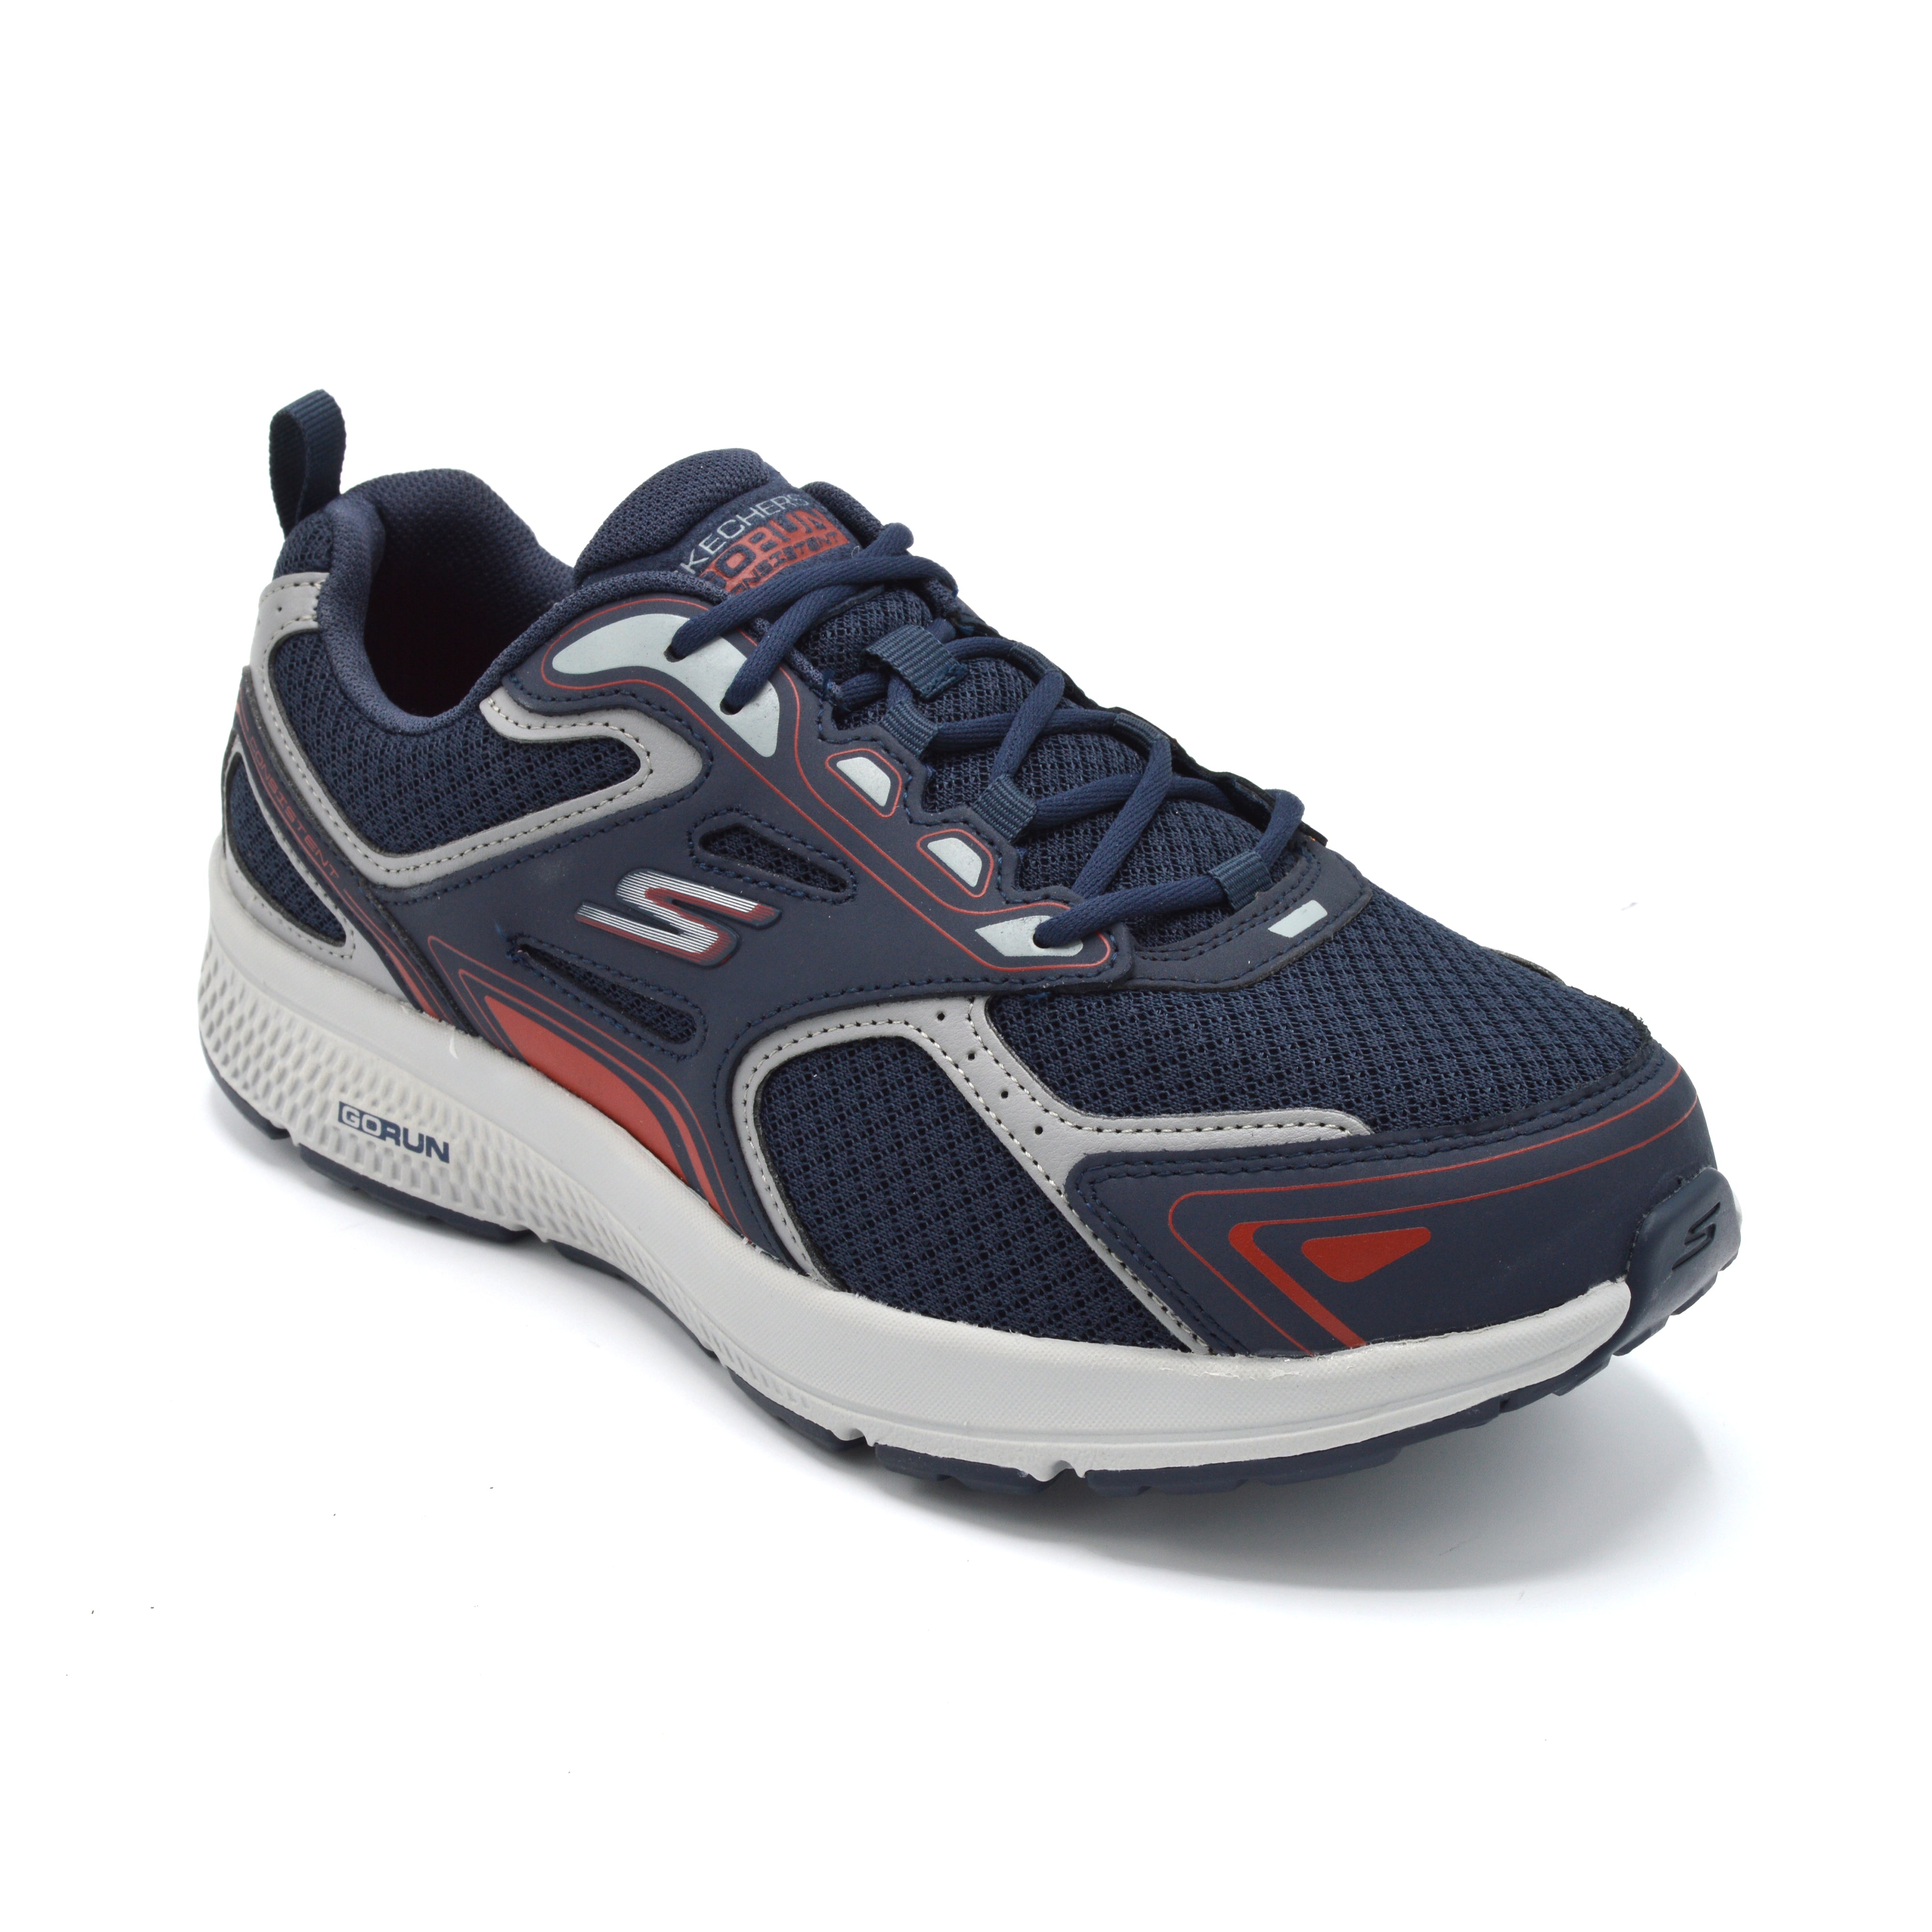 Skechers Go Run Consistent - Mens Wide Fit Trainer - 4E Fitting - Navy/Red